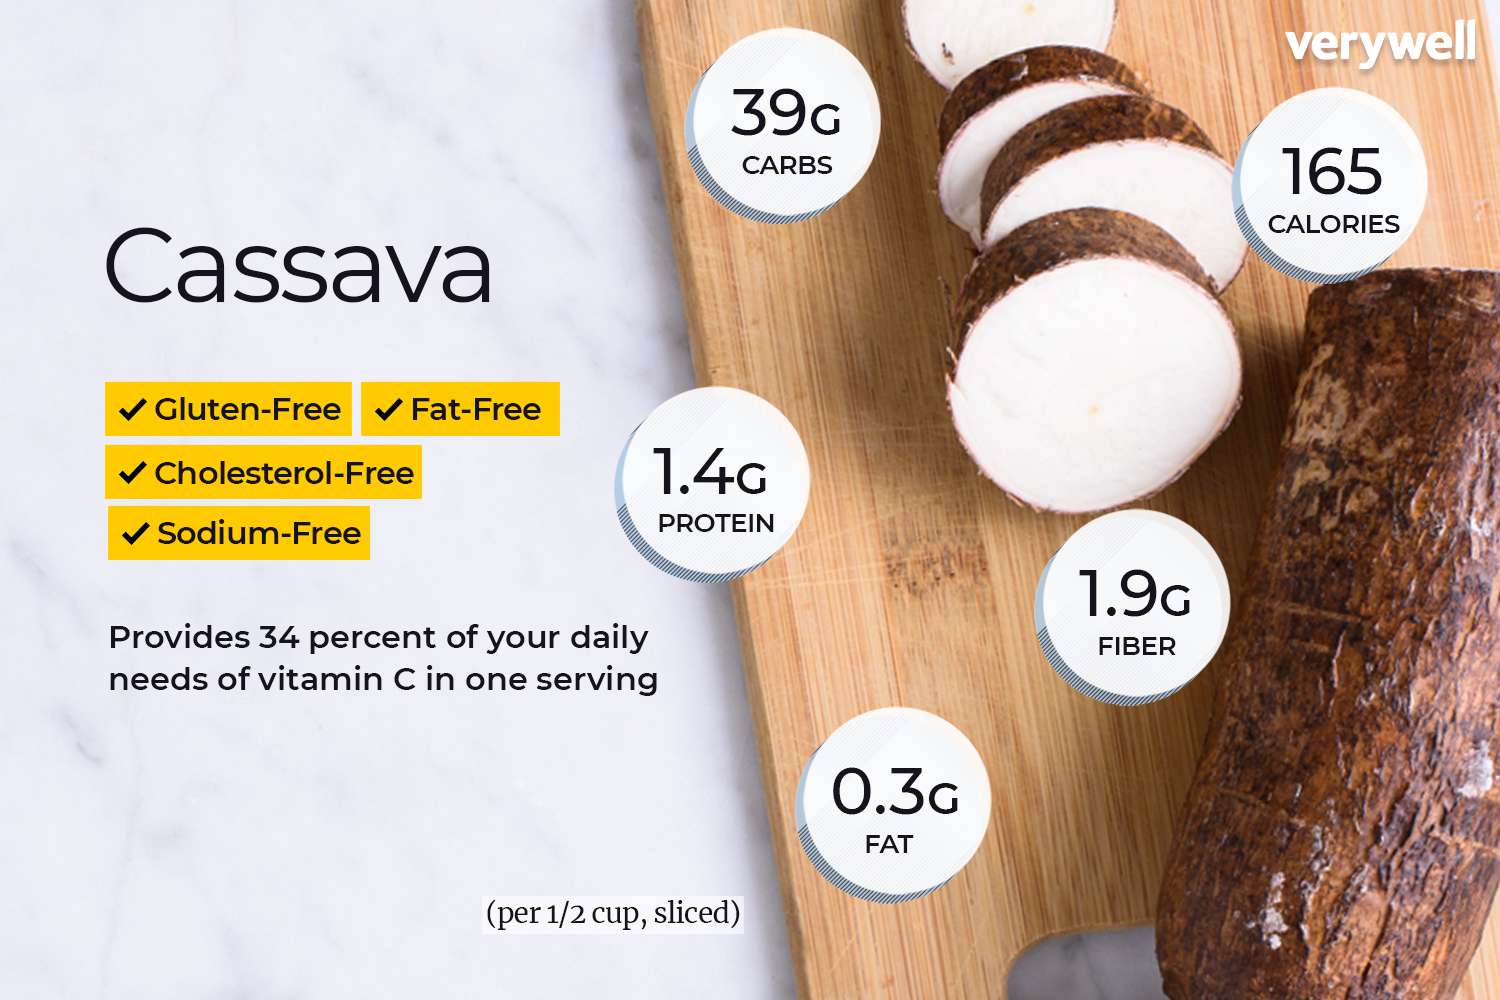 cassava nutrition facts and health benefits